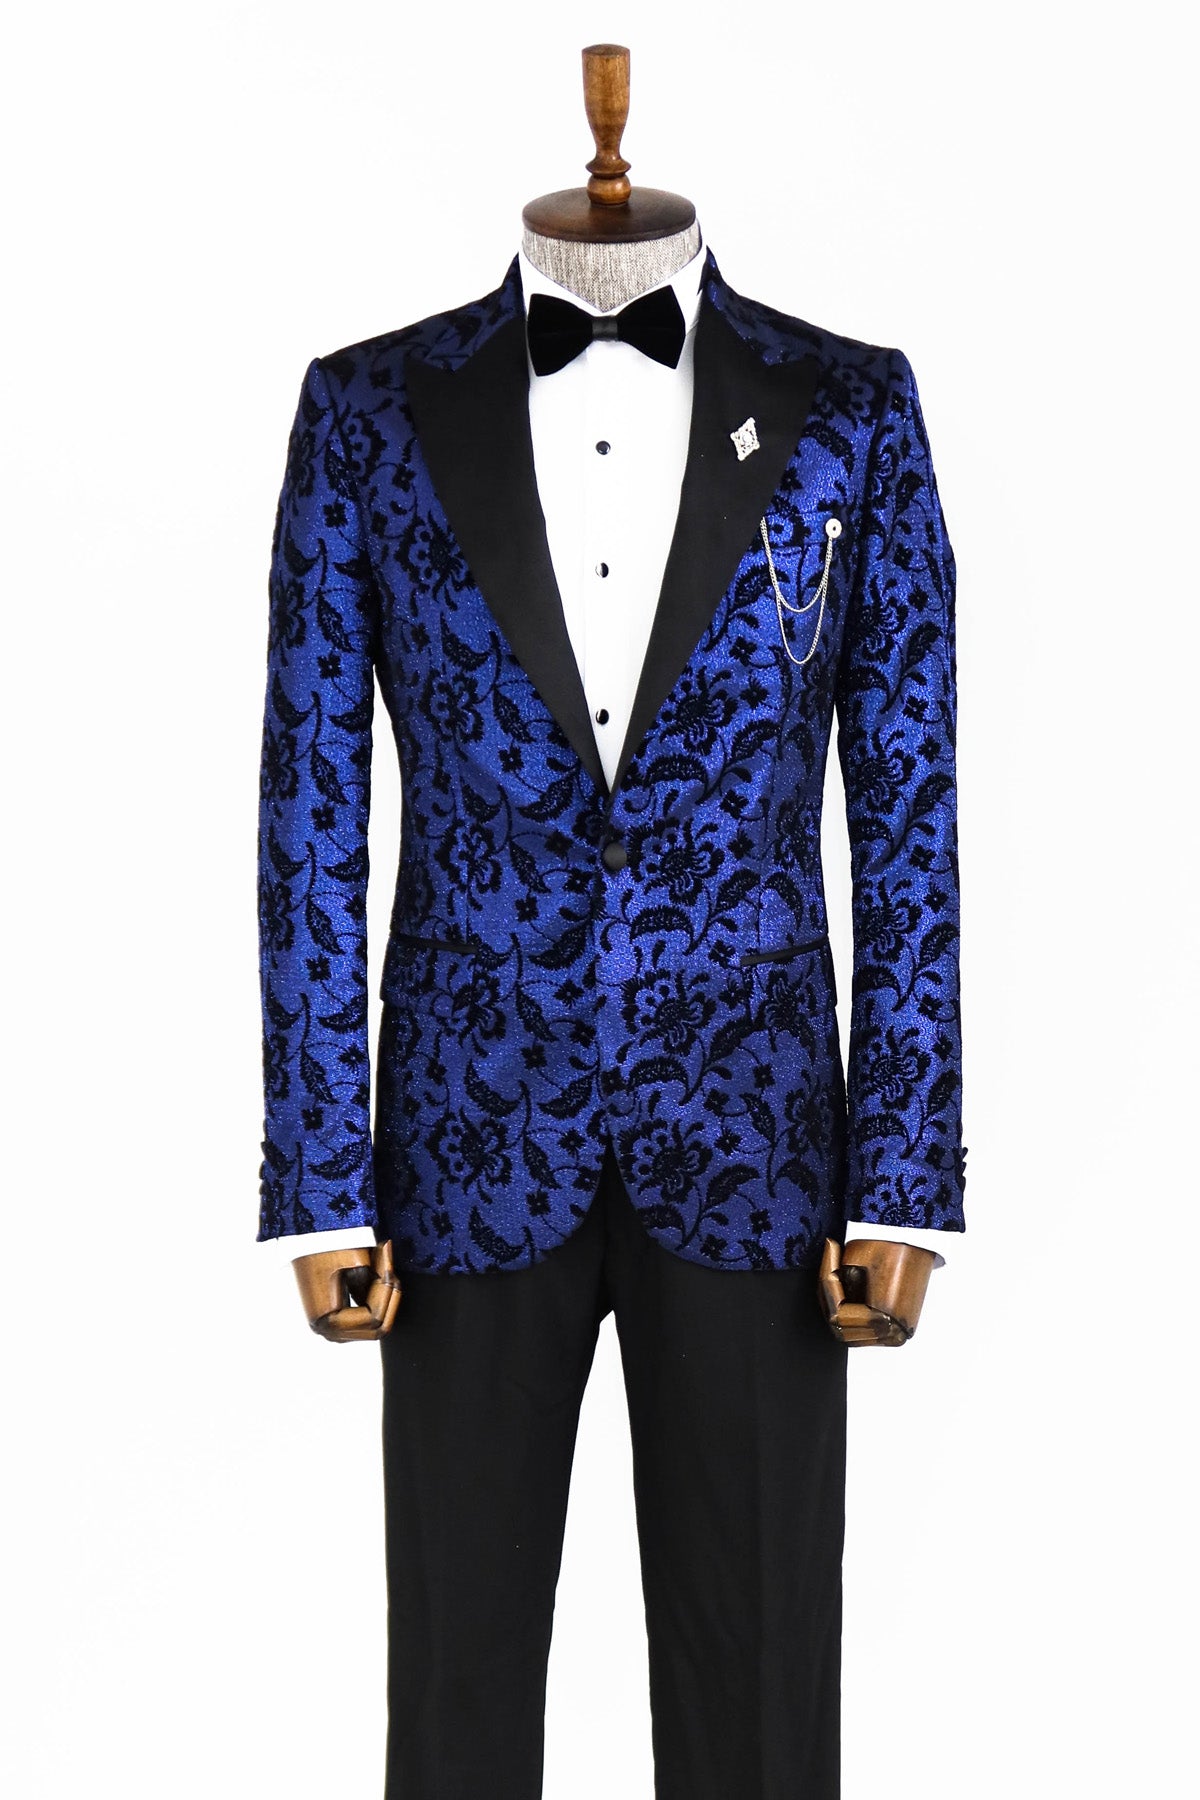 Midnight Blue Men's Sparkle Prom Blazer with Black Floral Design from KCT Menswear, perfect for standing out at prom."